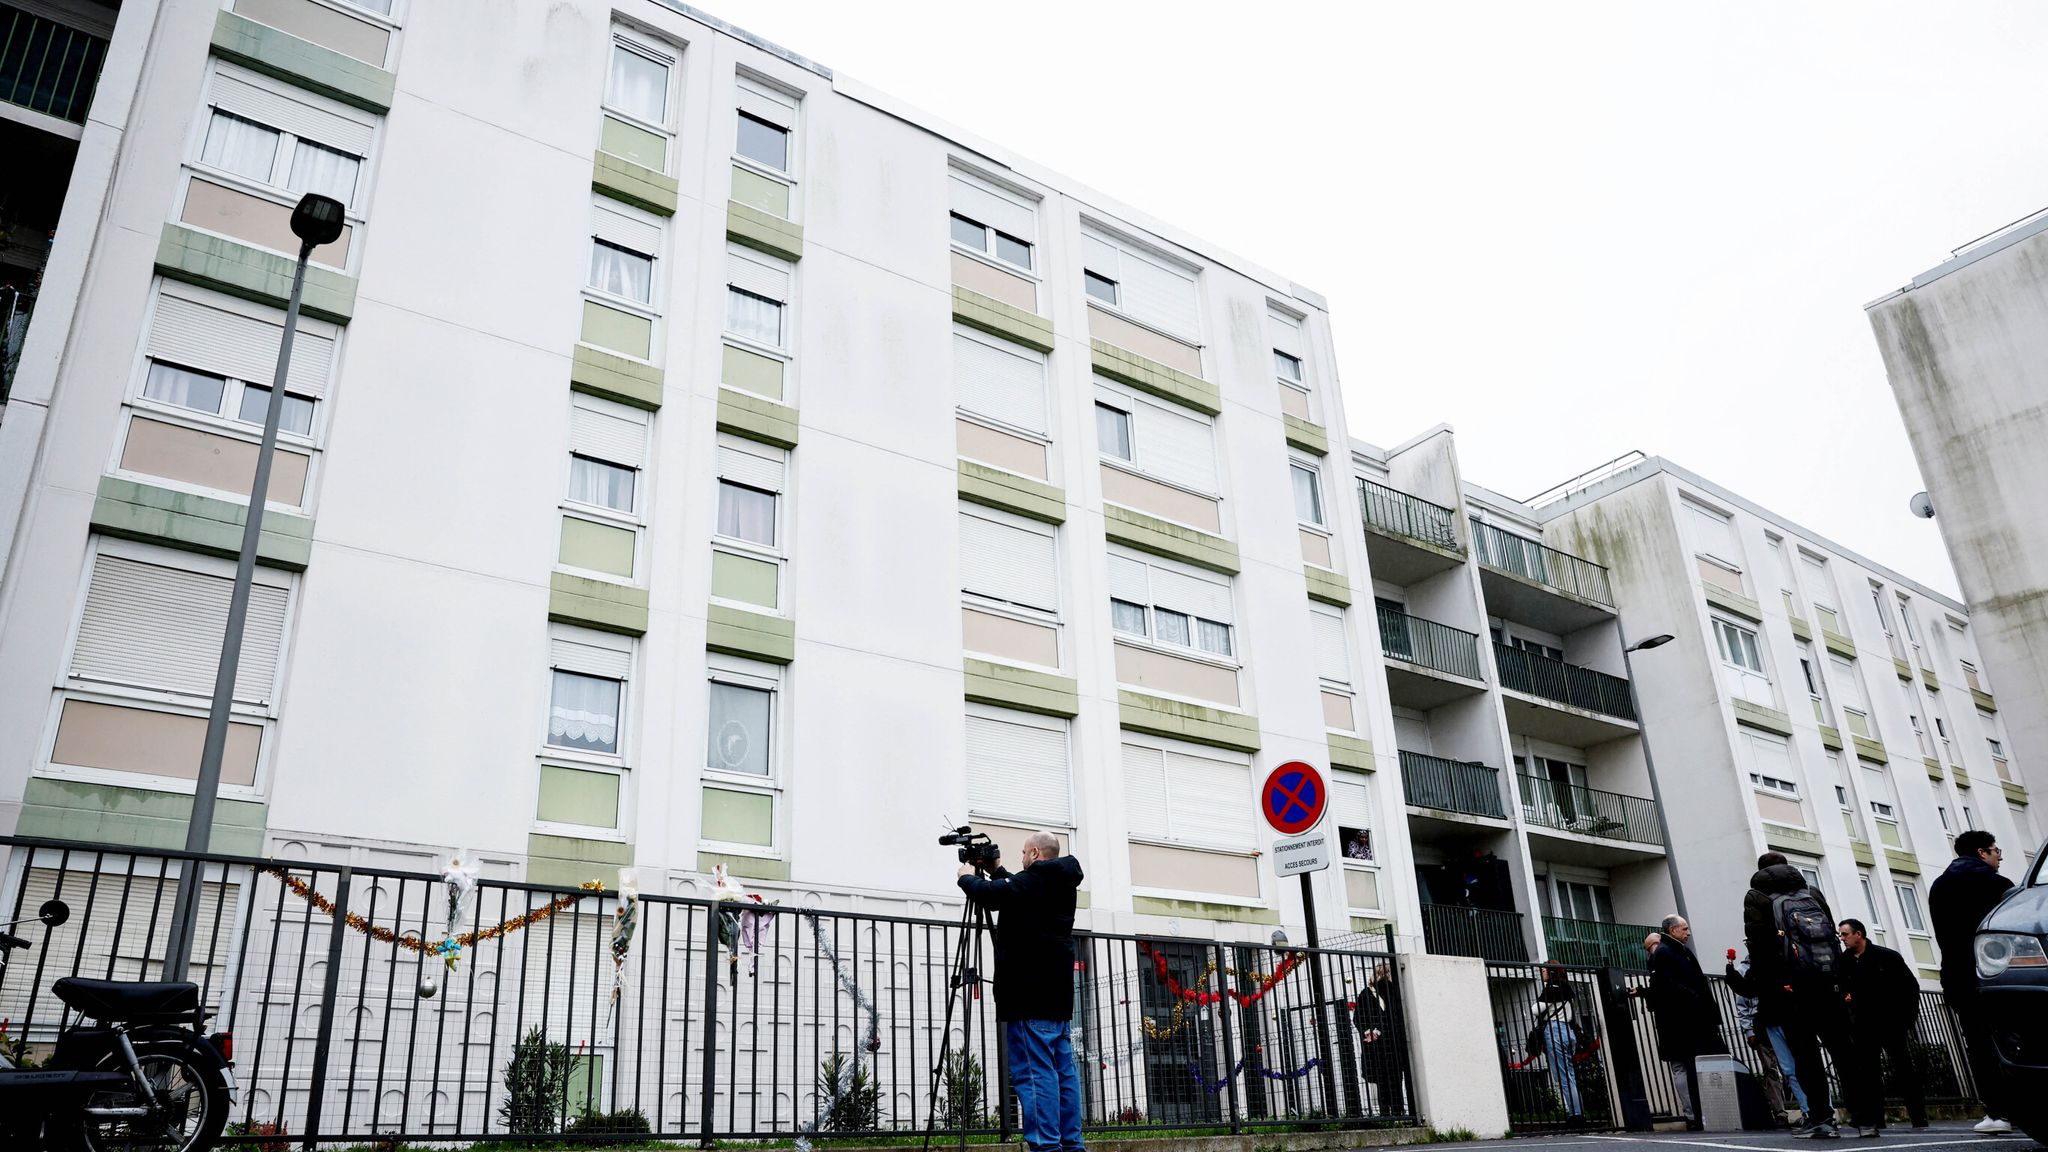 Mother and four children found dead in Paris flat on Christmas Day ...